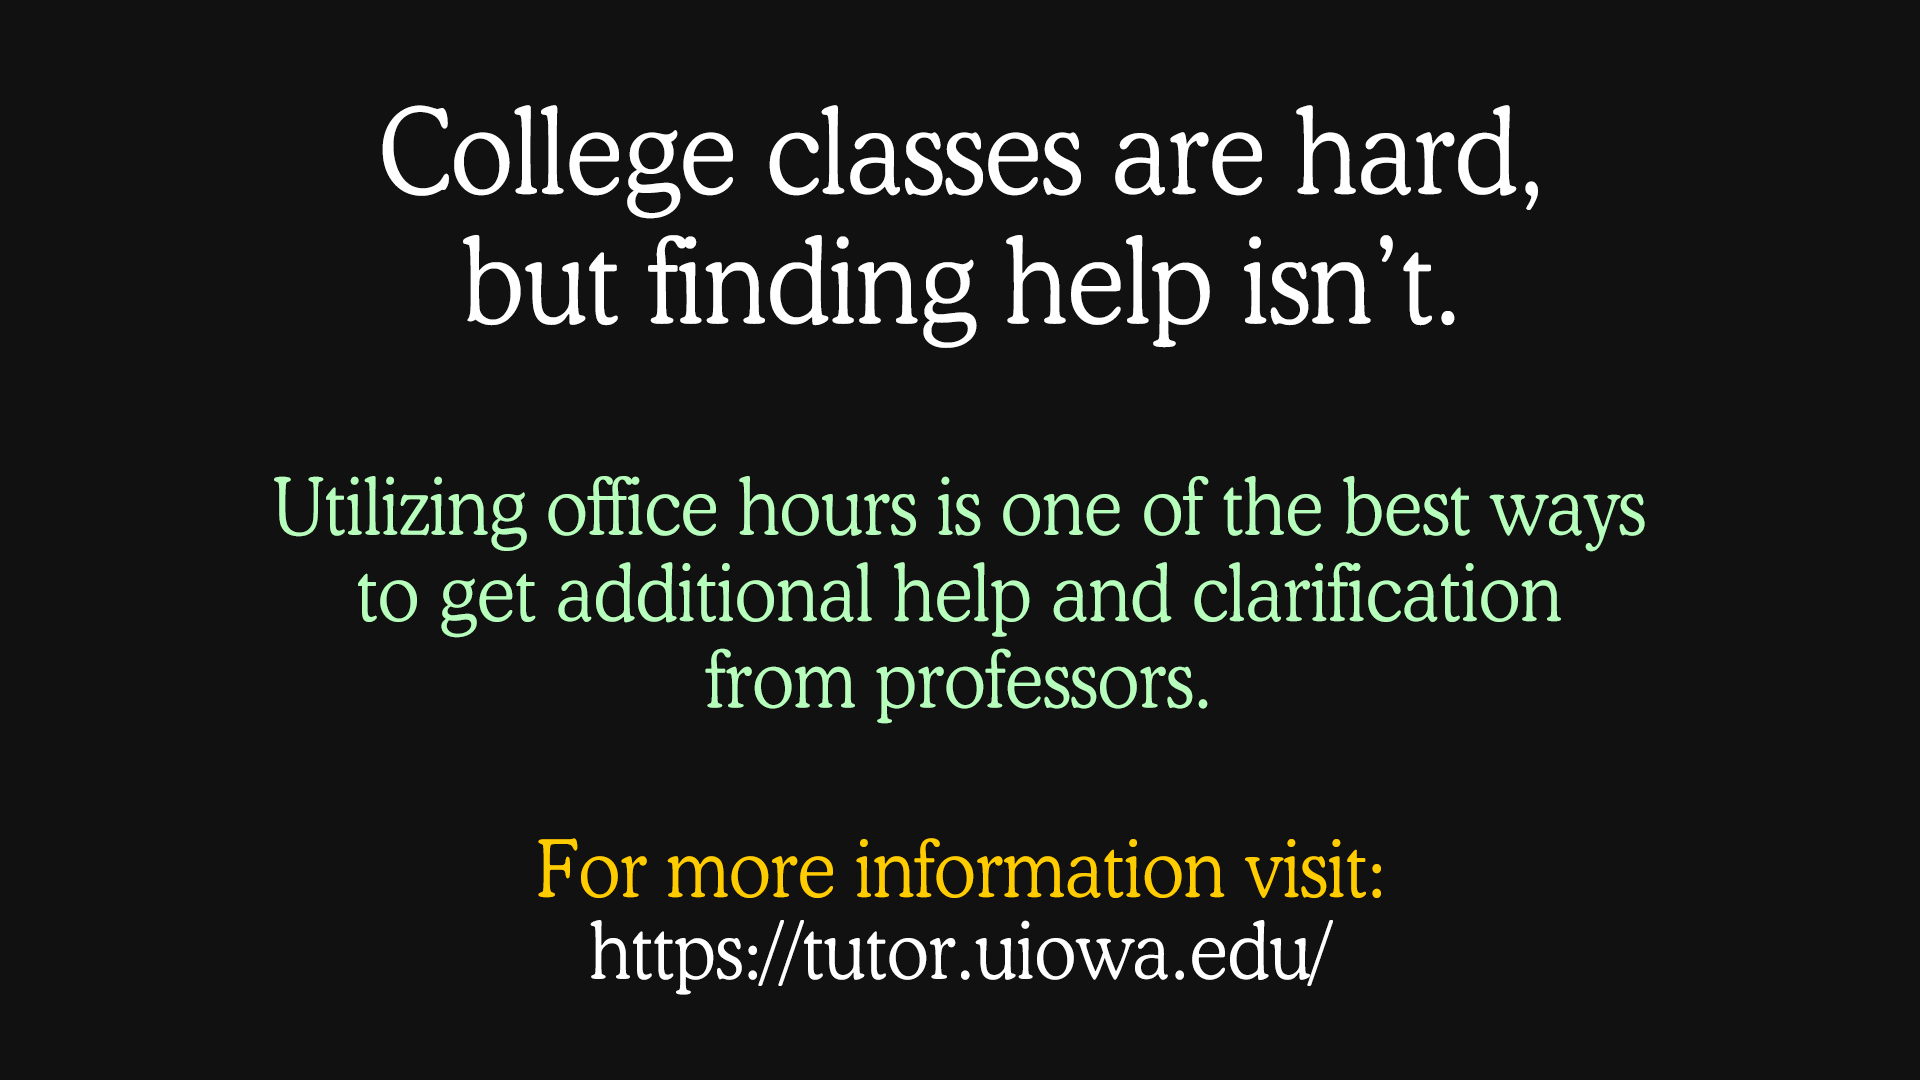 College classes are hard, but finding help isn't. Utilizing office hours is one of the best ways to get additional help and clarification from professors. For more information, visit: https://tutor.uiowa.edu.